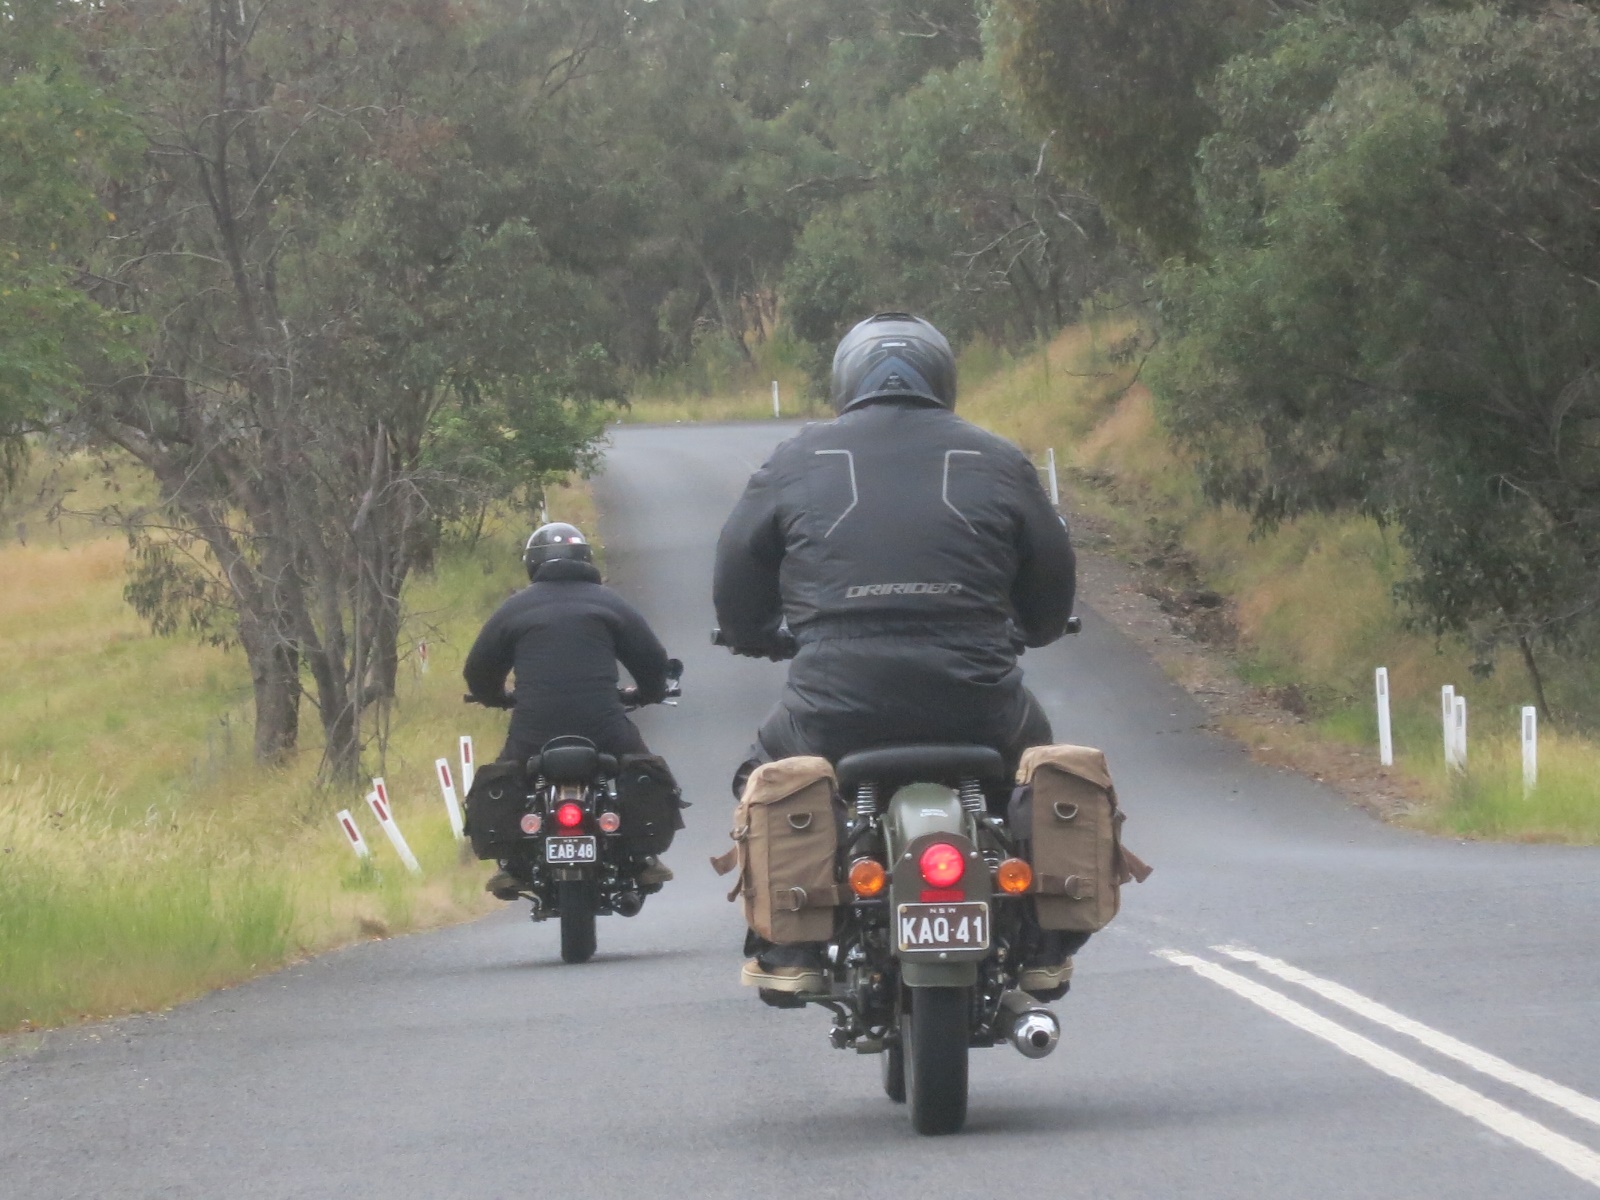 A couple of people ride motorcycles down a road

Description automatically generated with low confidence